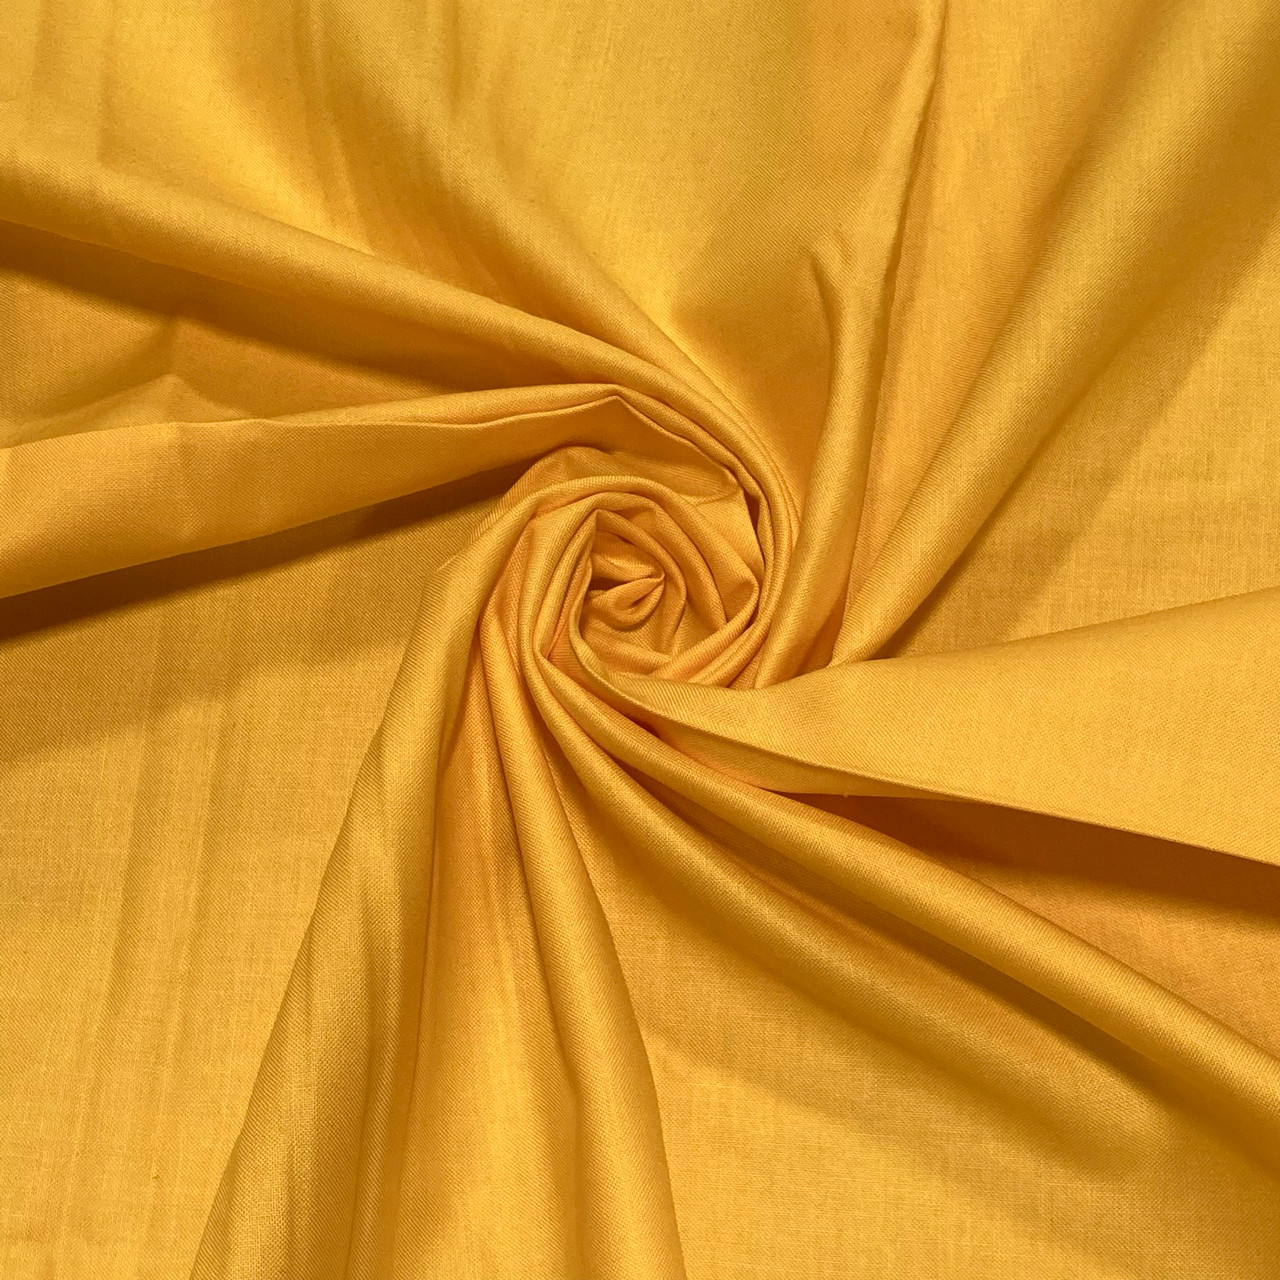 Solid Yellow Cotton Sheeting Fabric-Coordinating Yellow Solid Cotton Fabric